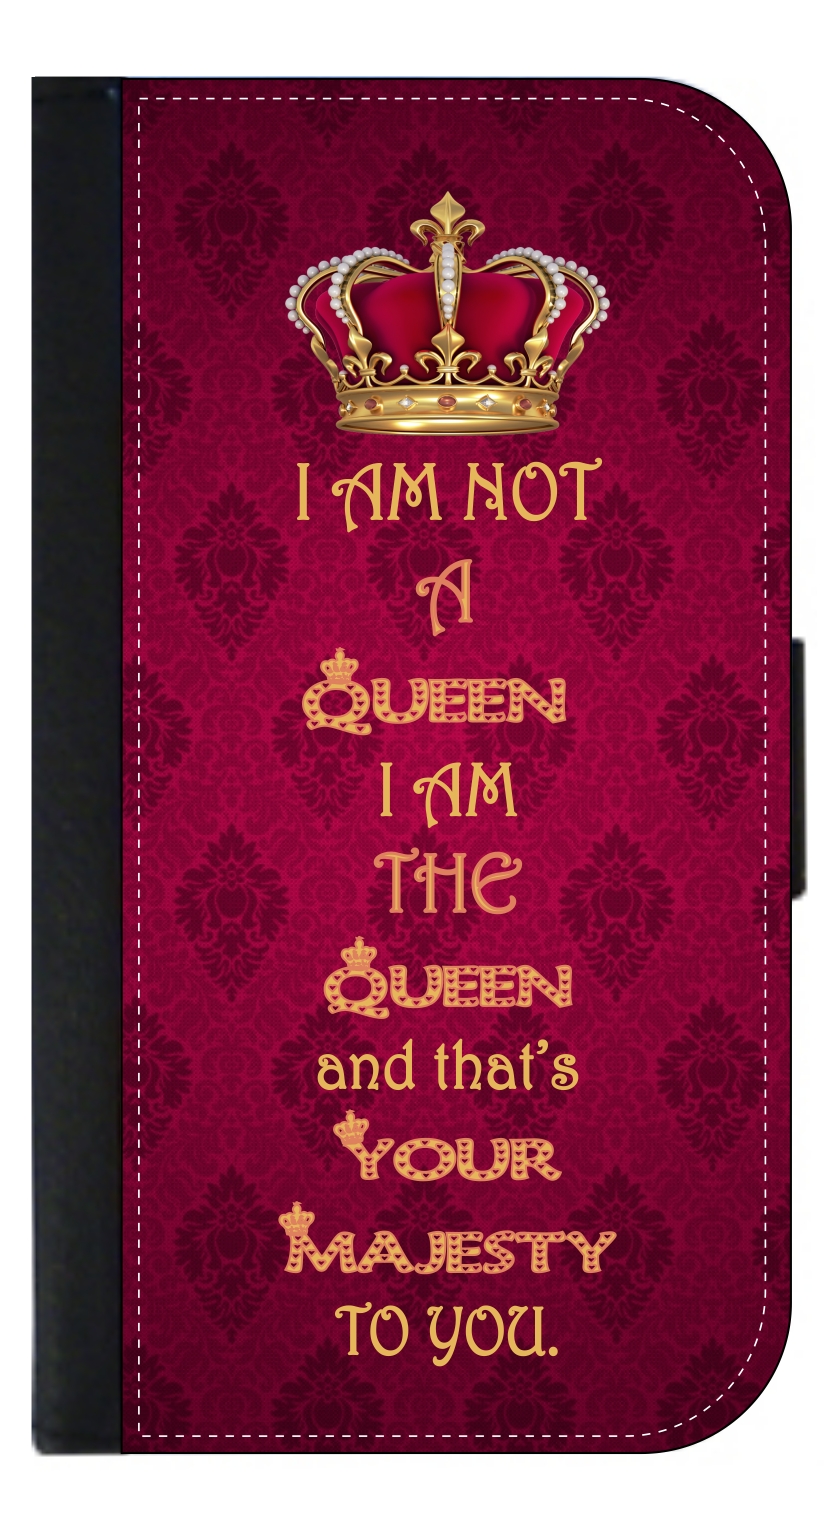 Queen Majesty Quote Galaxy s10p Case - Galaxy s10 Plus Case - Galaxy s10 Plus Wallet Case - s10 Plus Case Wallet - Galaxy s10 Plus Case Wallet - s10 Plus Case Flip Cover - image 1 of 3